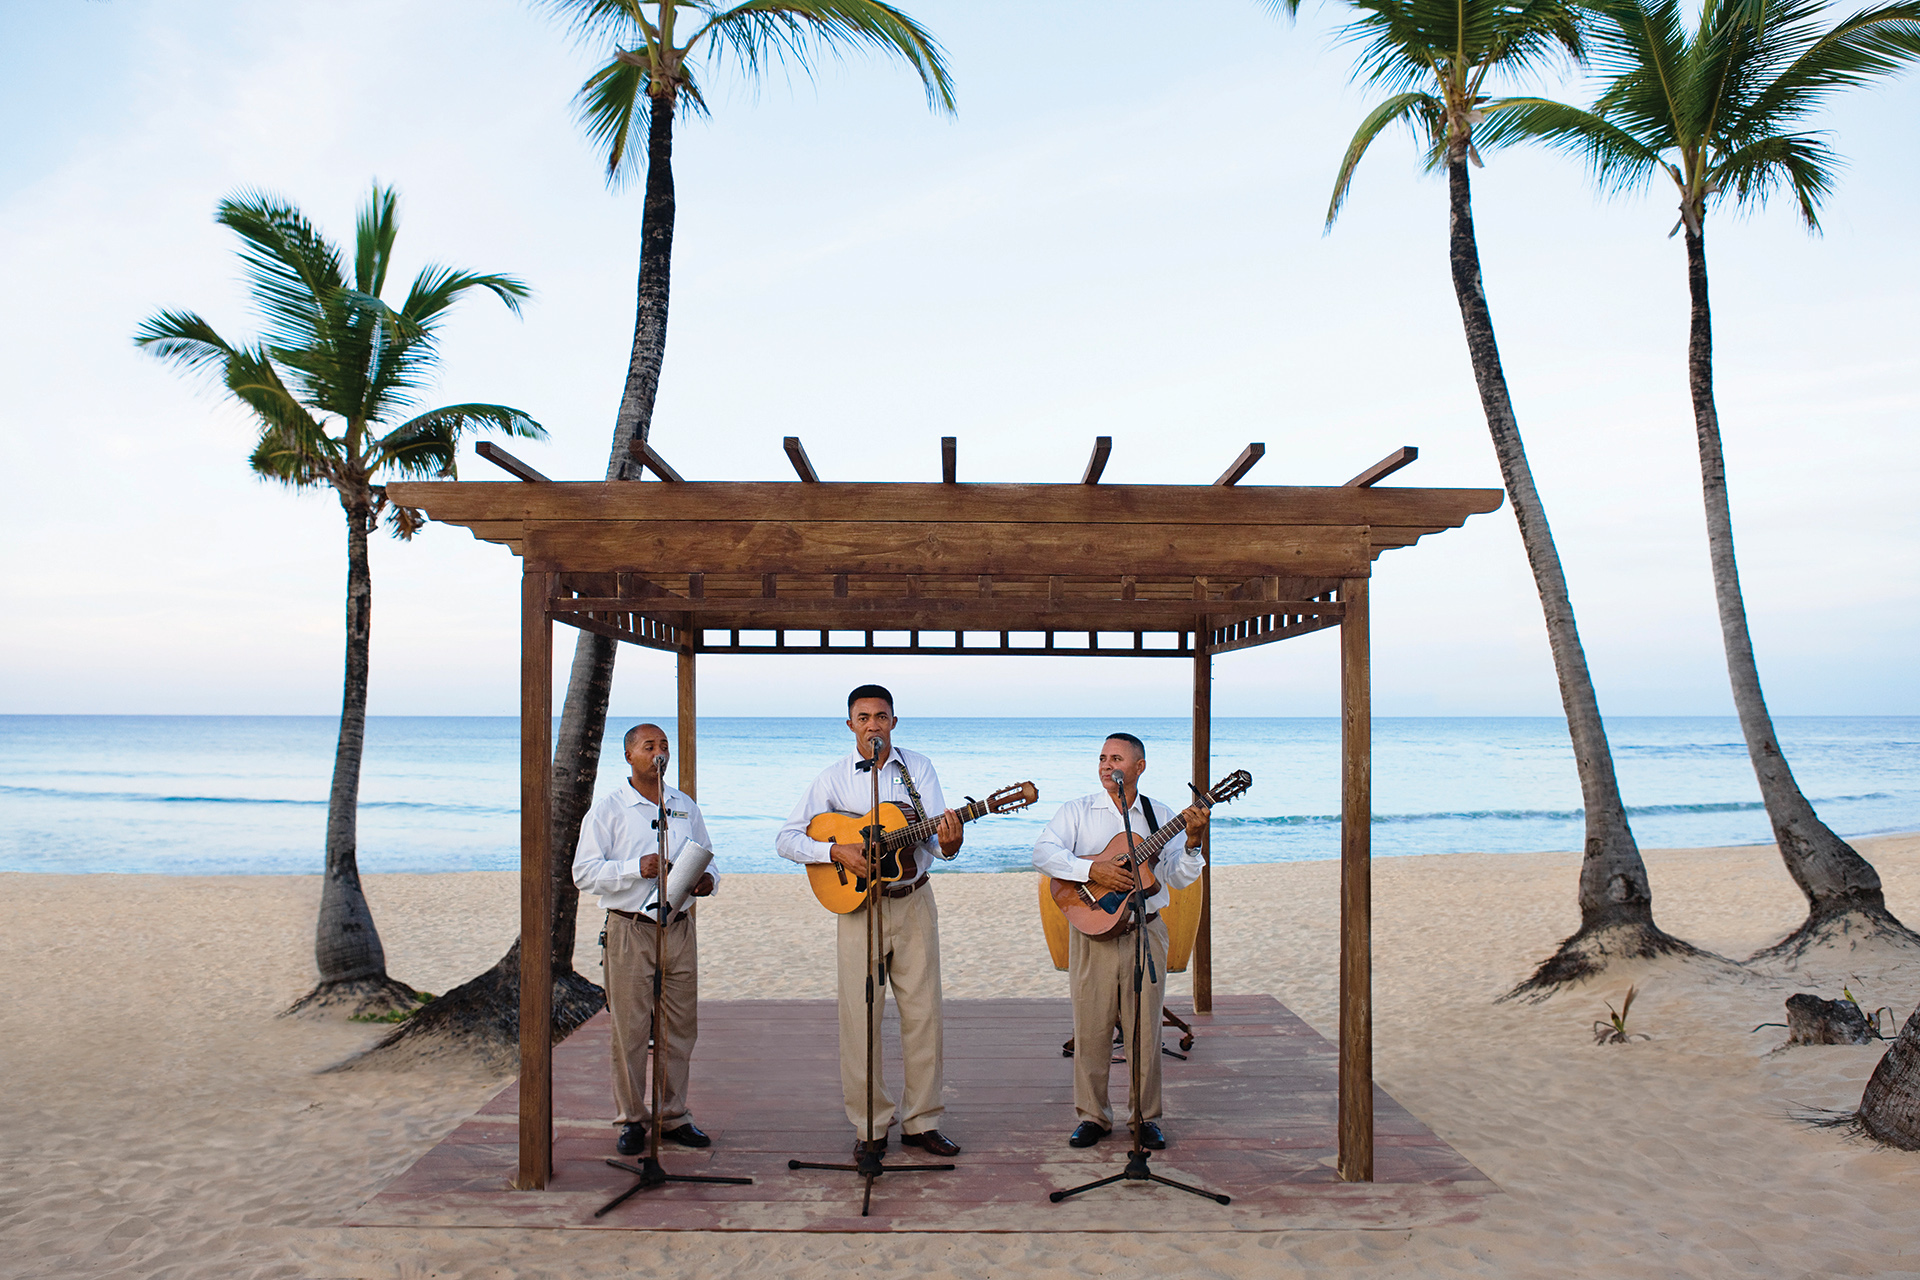 Live music in the Caribbean for your wedding